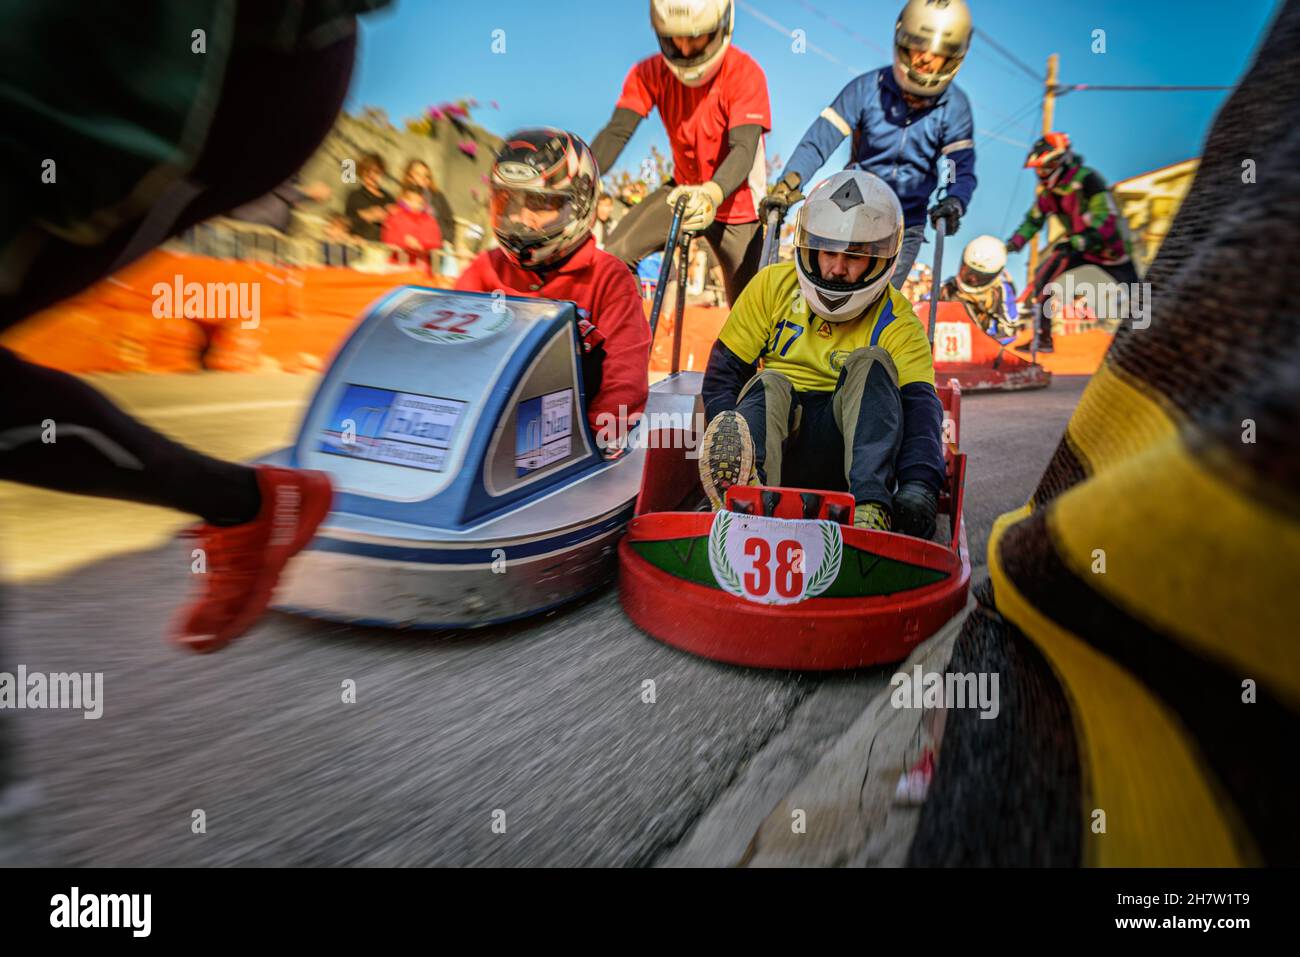 Kart and Race Foto Stock